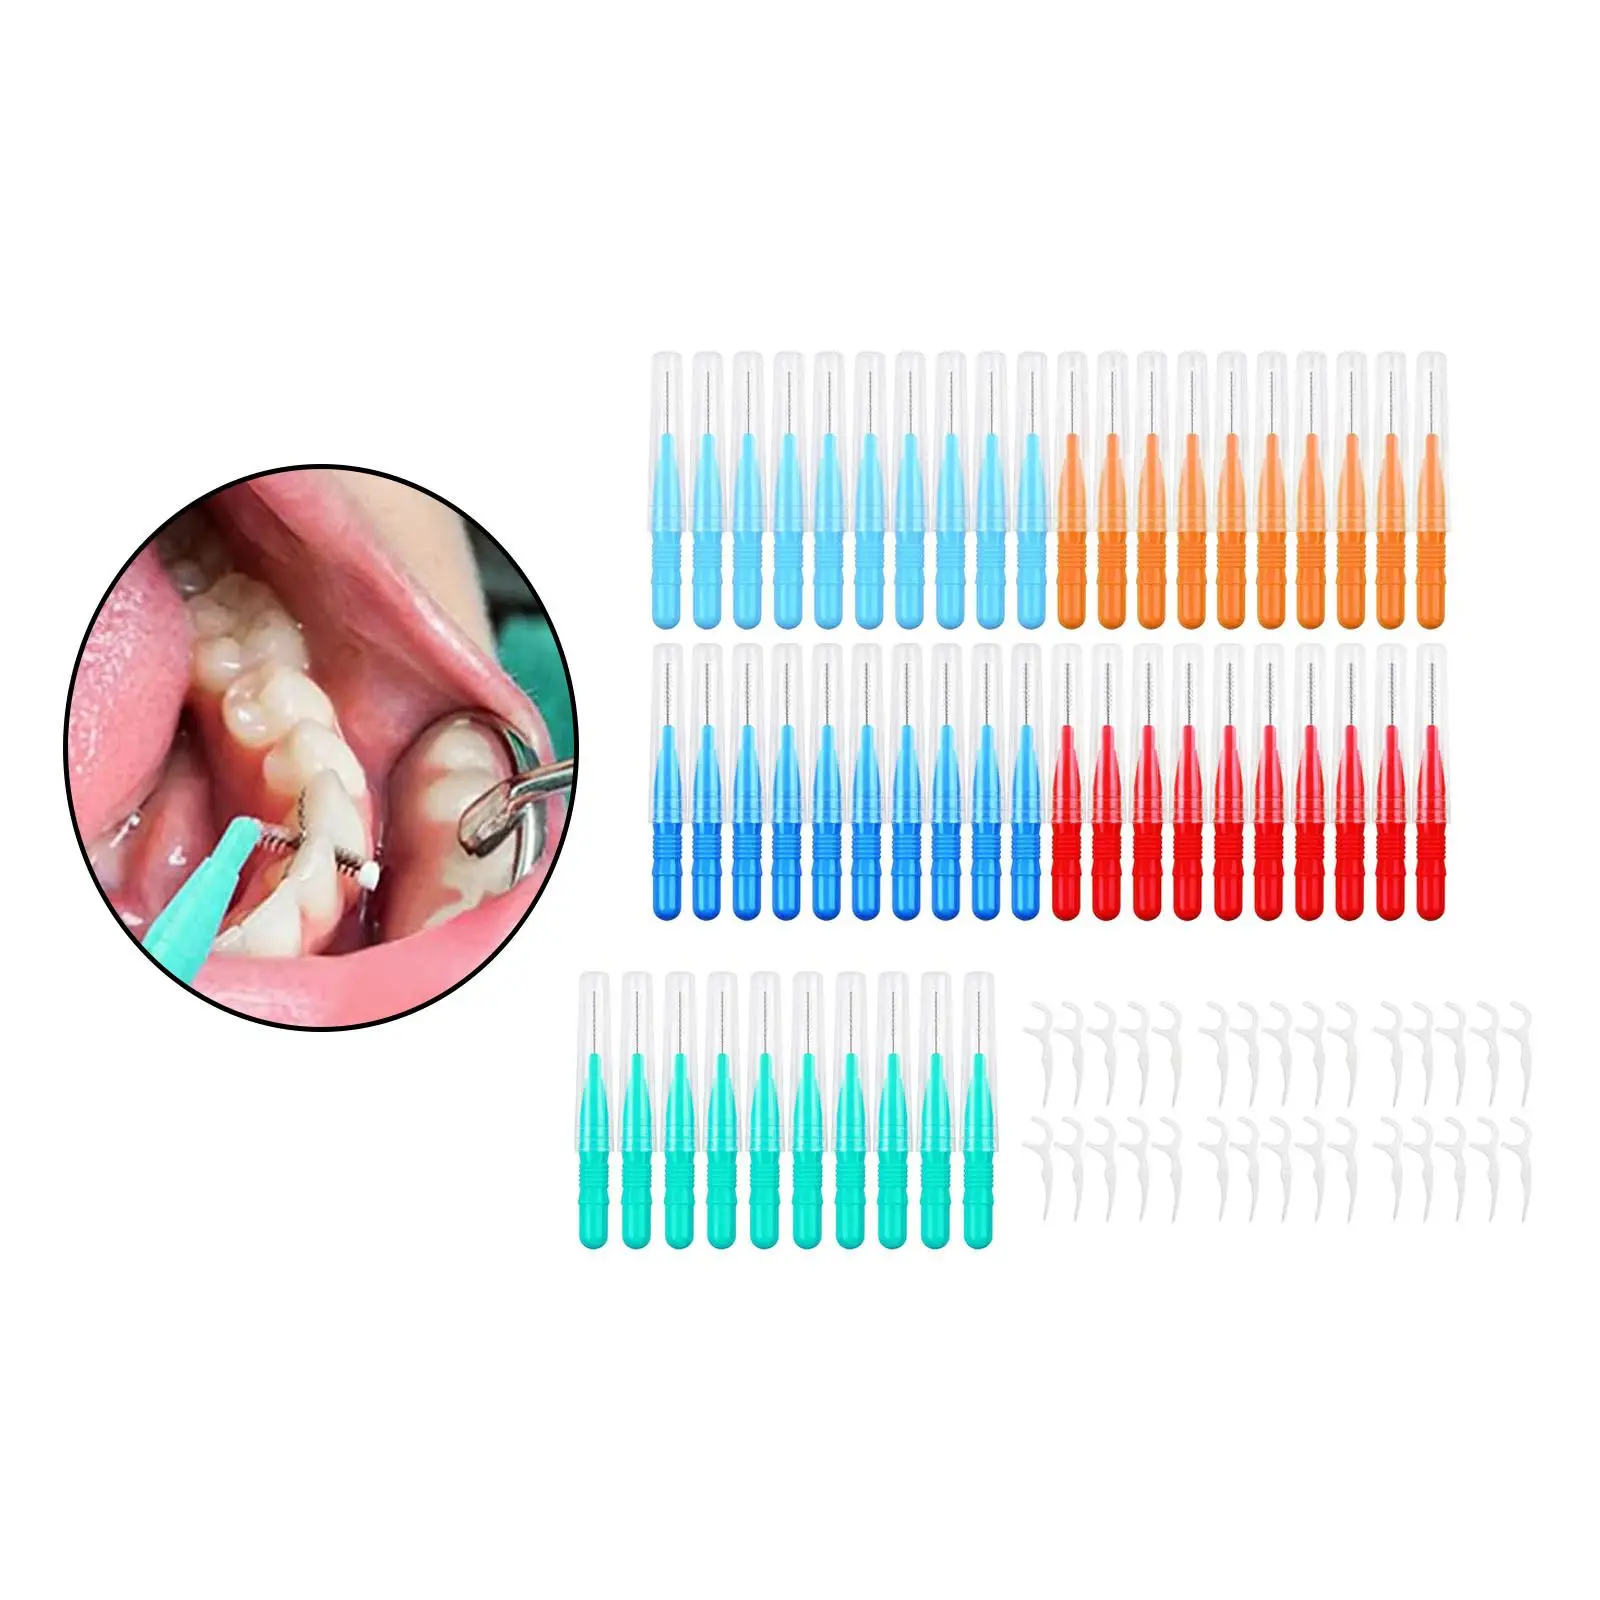 50Pcs Interdental Brushes 2mm 2.5mm 3mm for Removing Food and Plaque Between Teeth Portable 30x Floss Sticks Teeth Cleaners